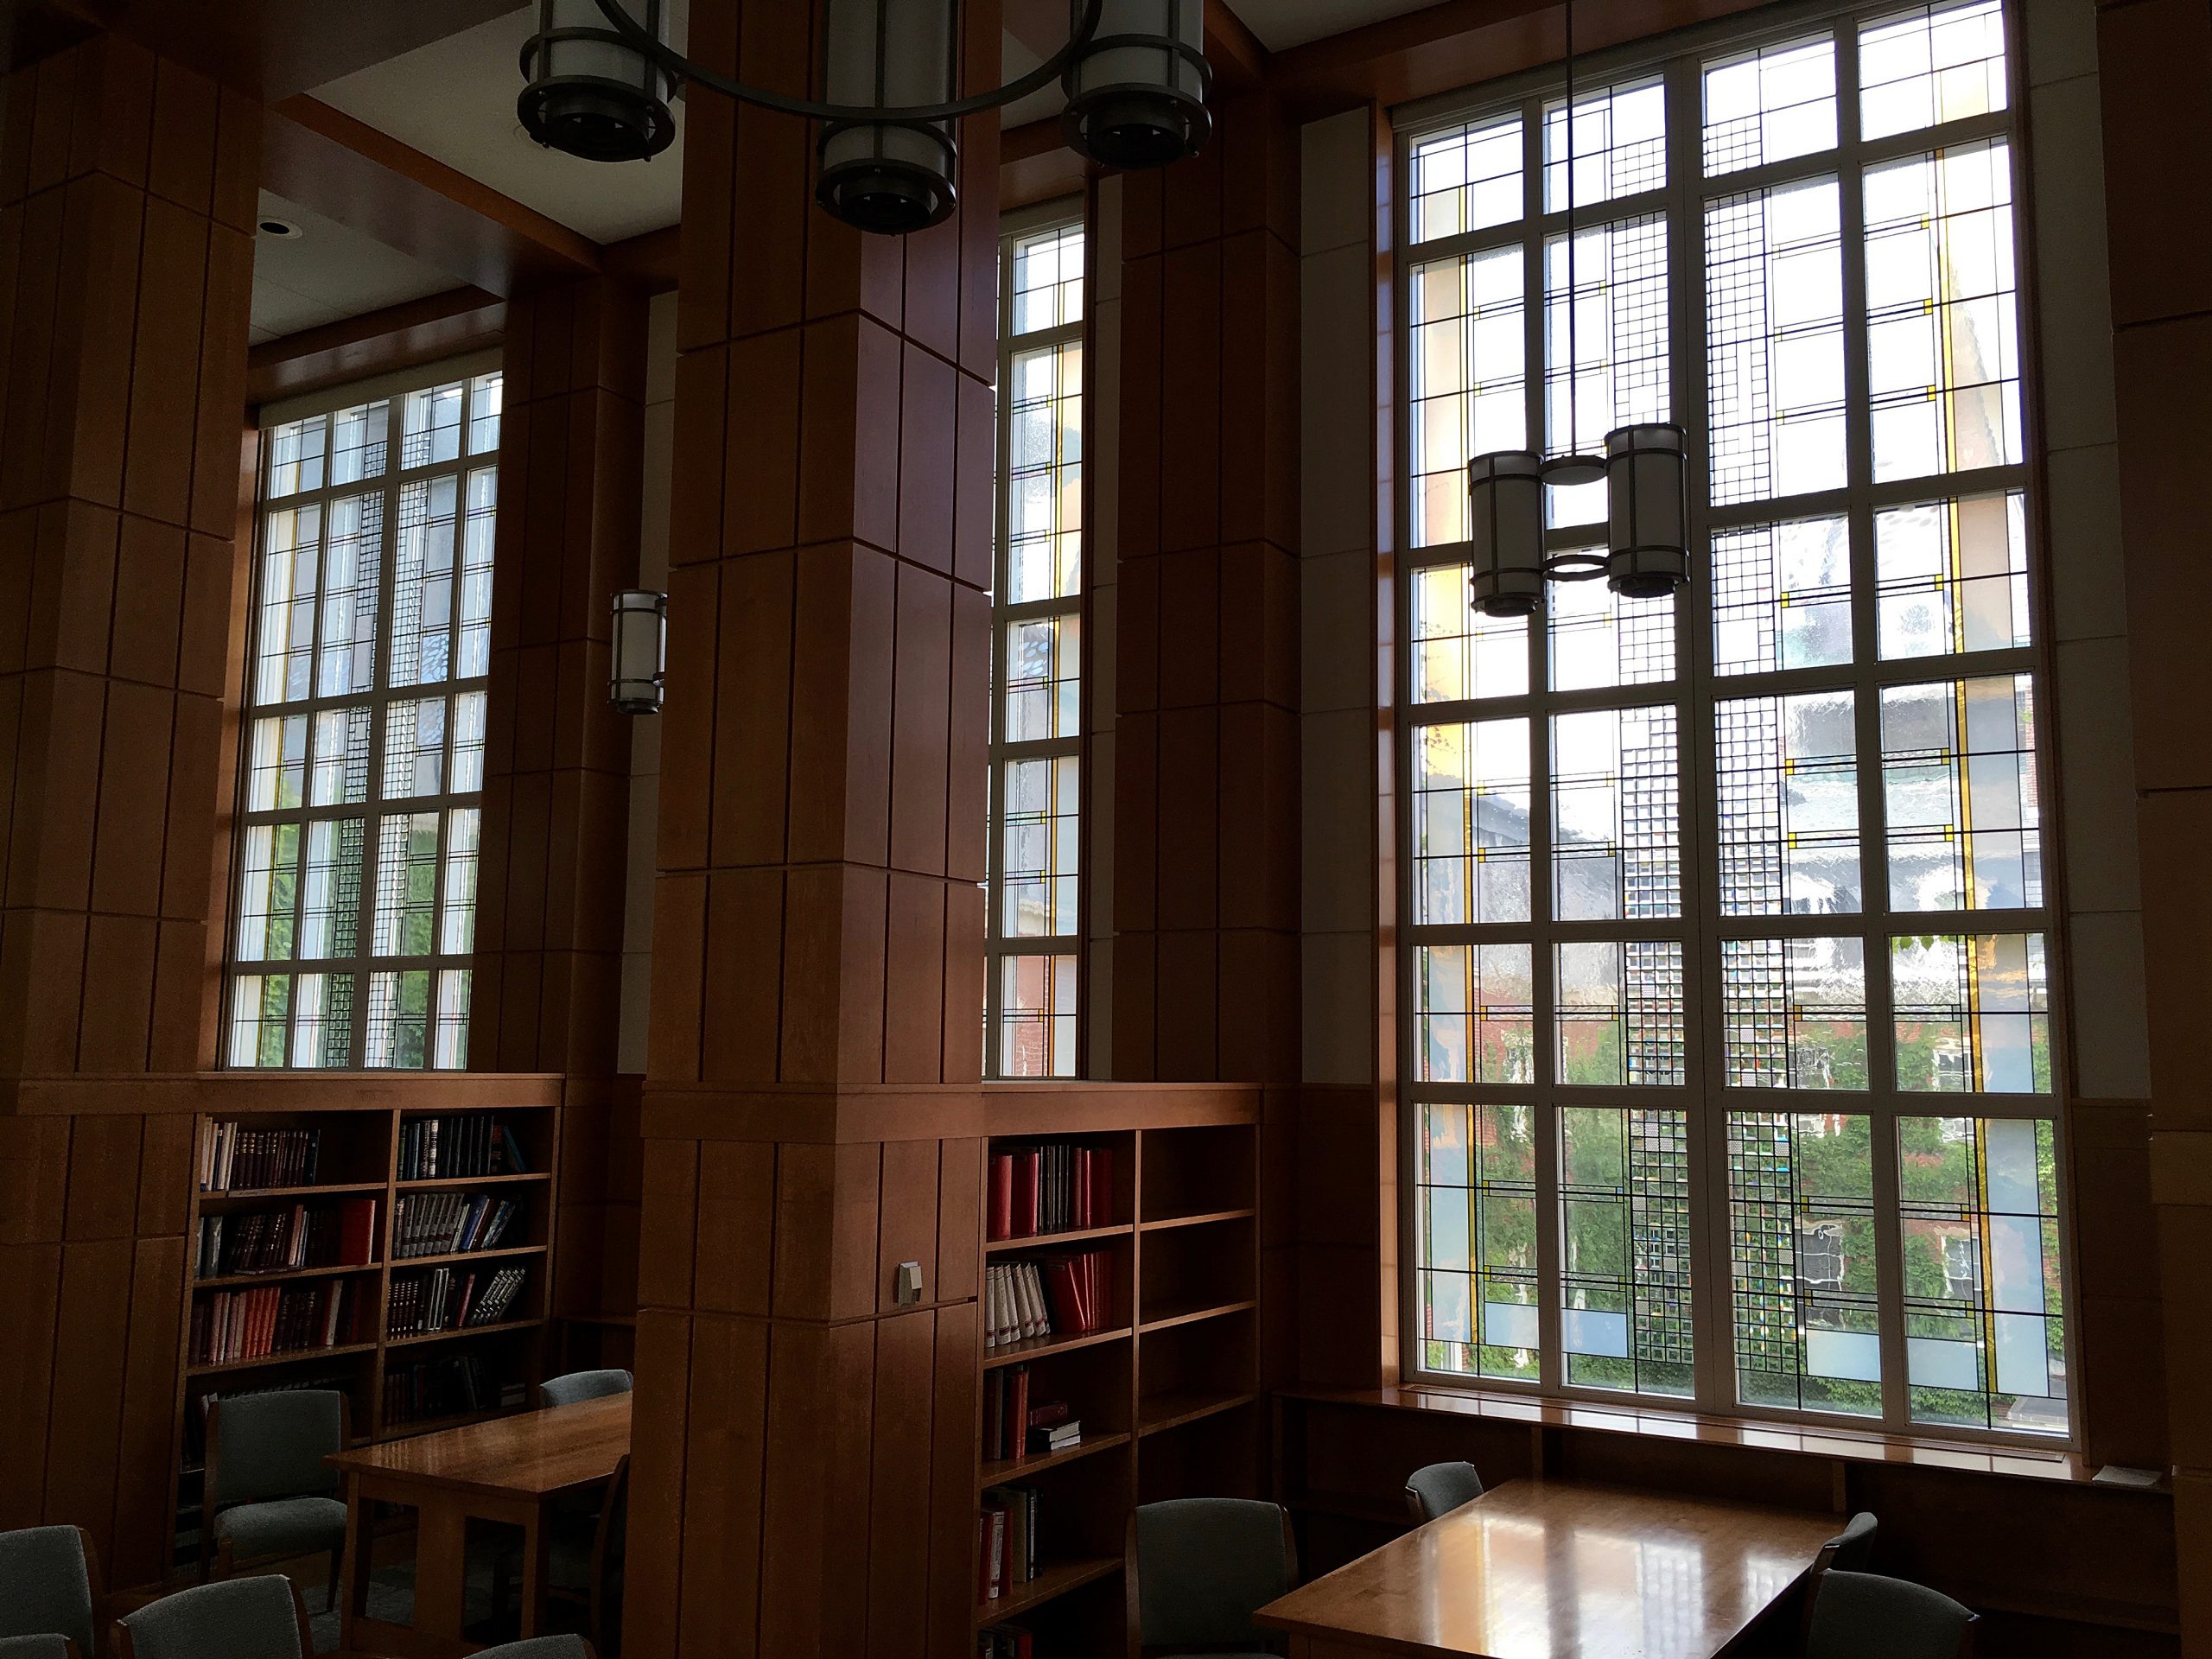 Rehm Library, Smith Hall, College of the Holy Cross, Worcester, MA.